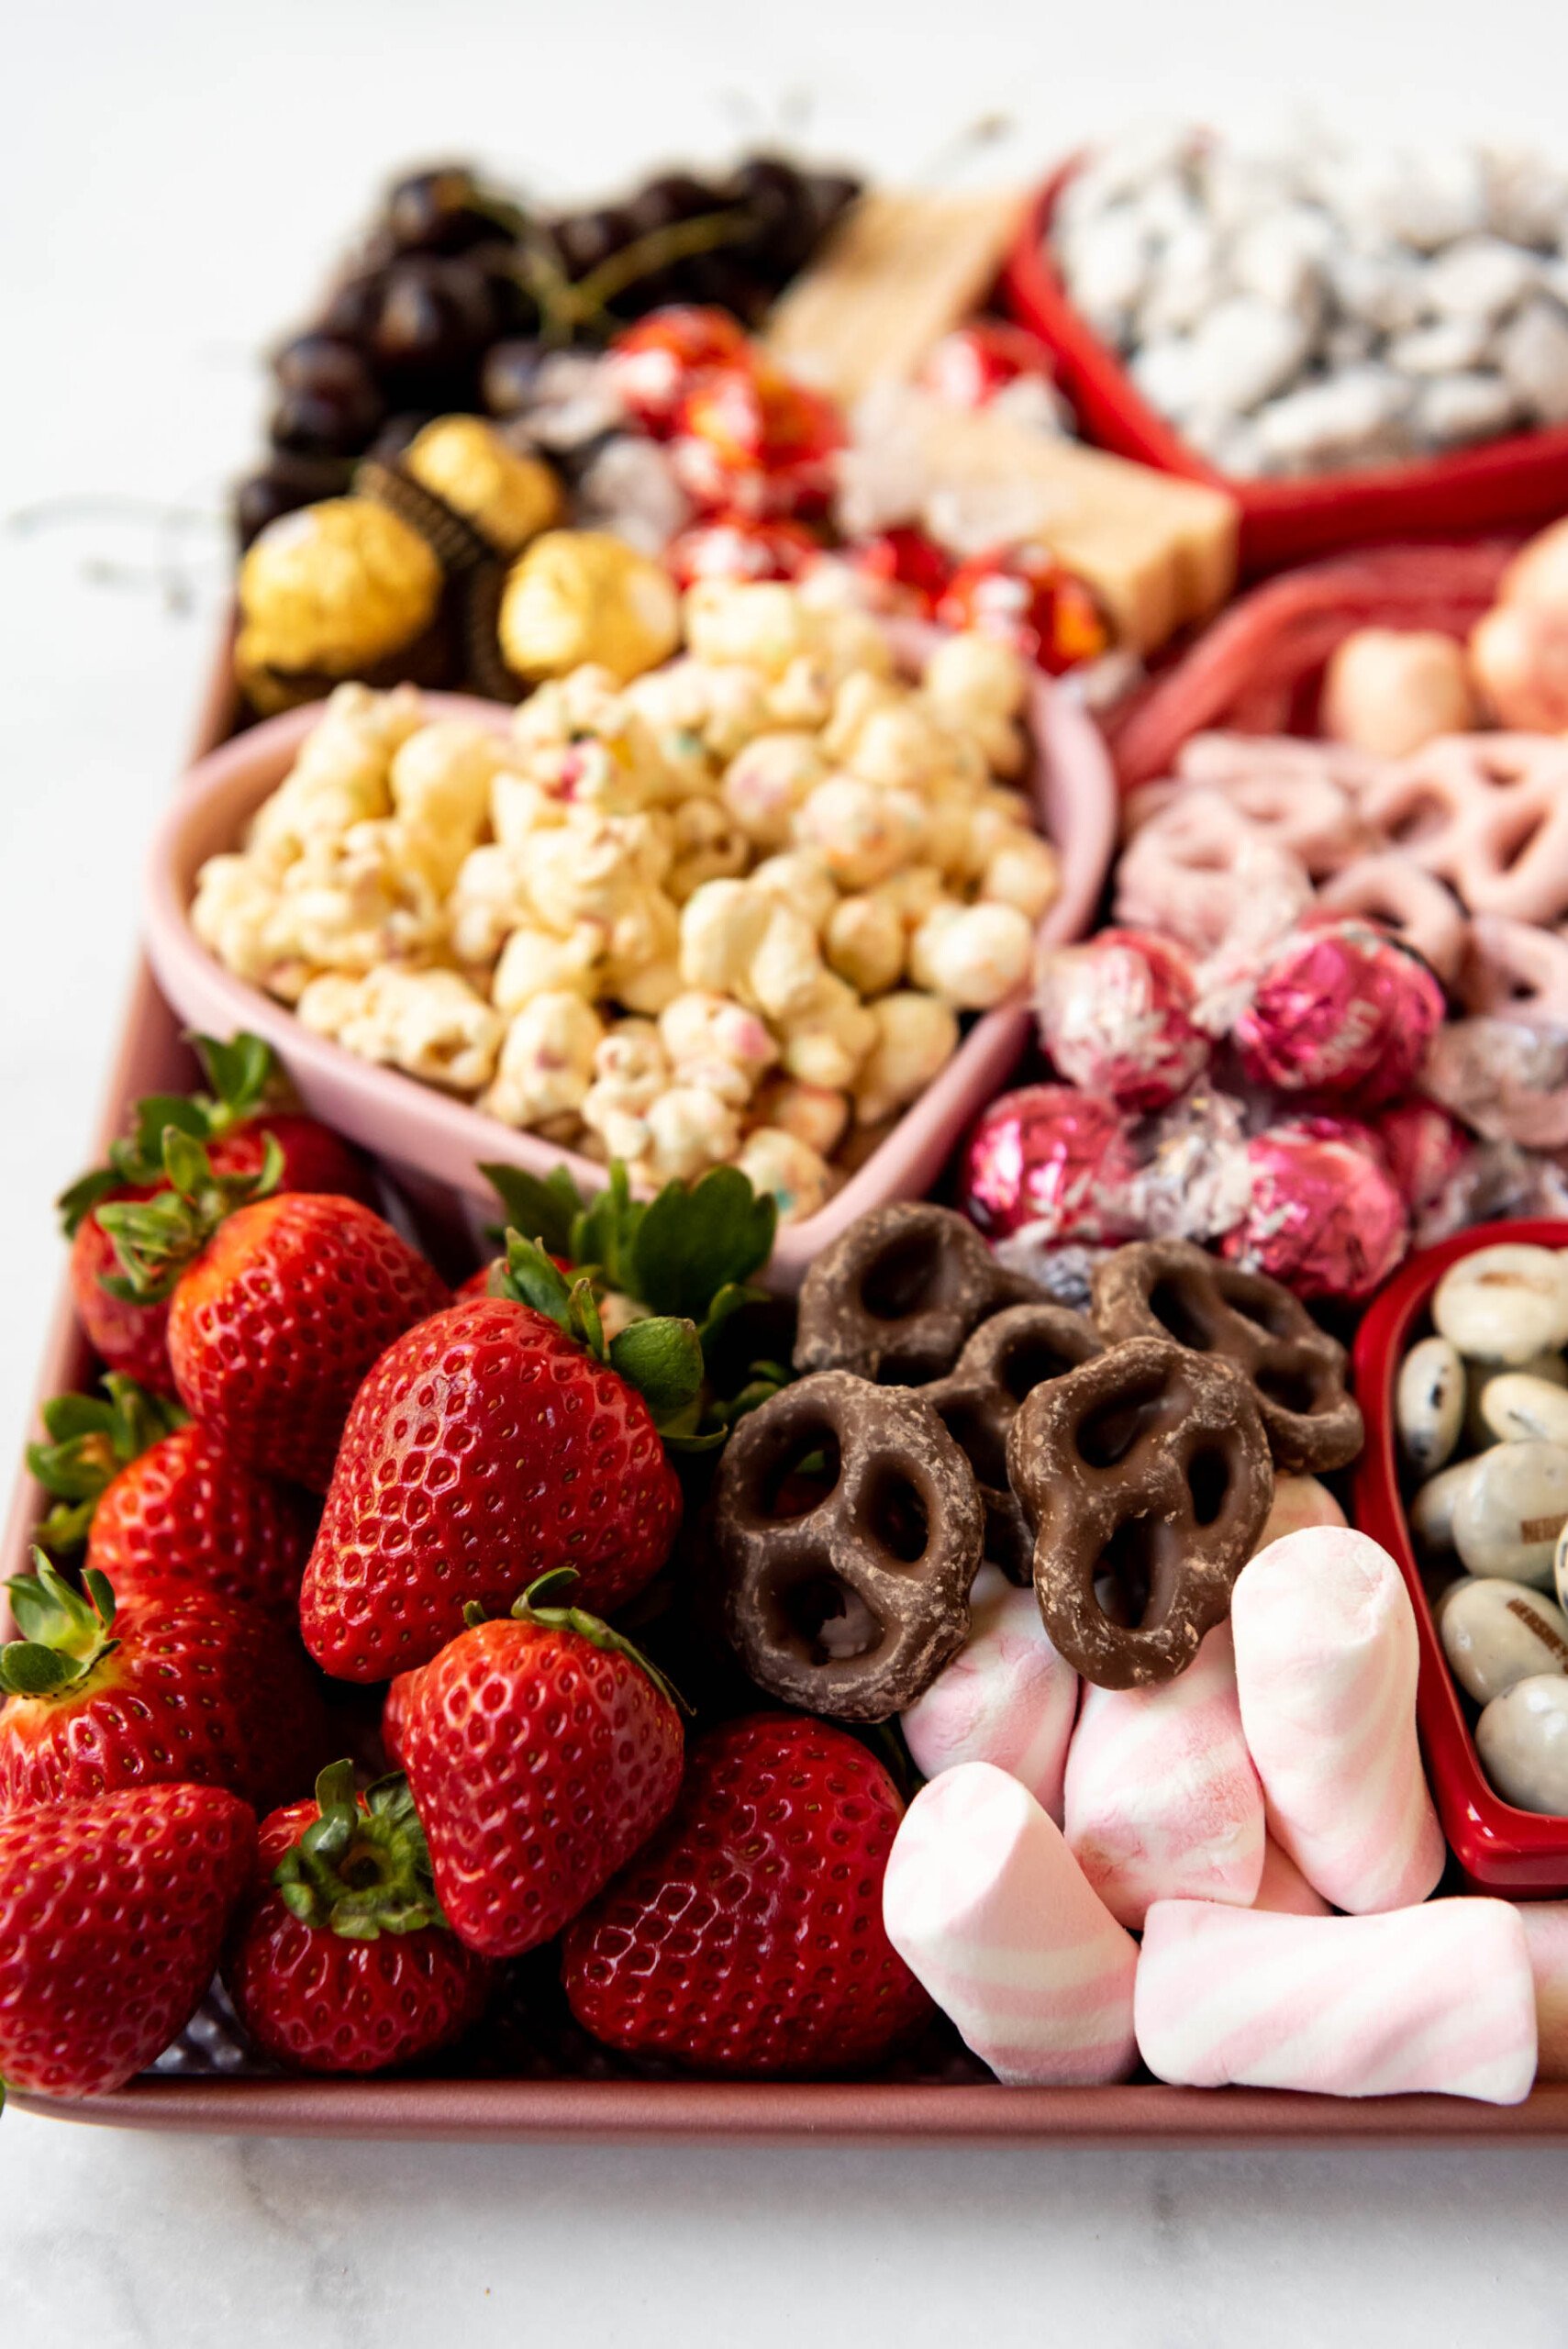 Strawberries, chocolate covered pretzels, marshmallows, and popcorn on a Valentine's Day dessert charcuterie board.